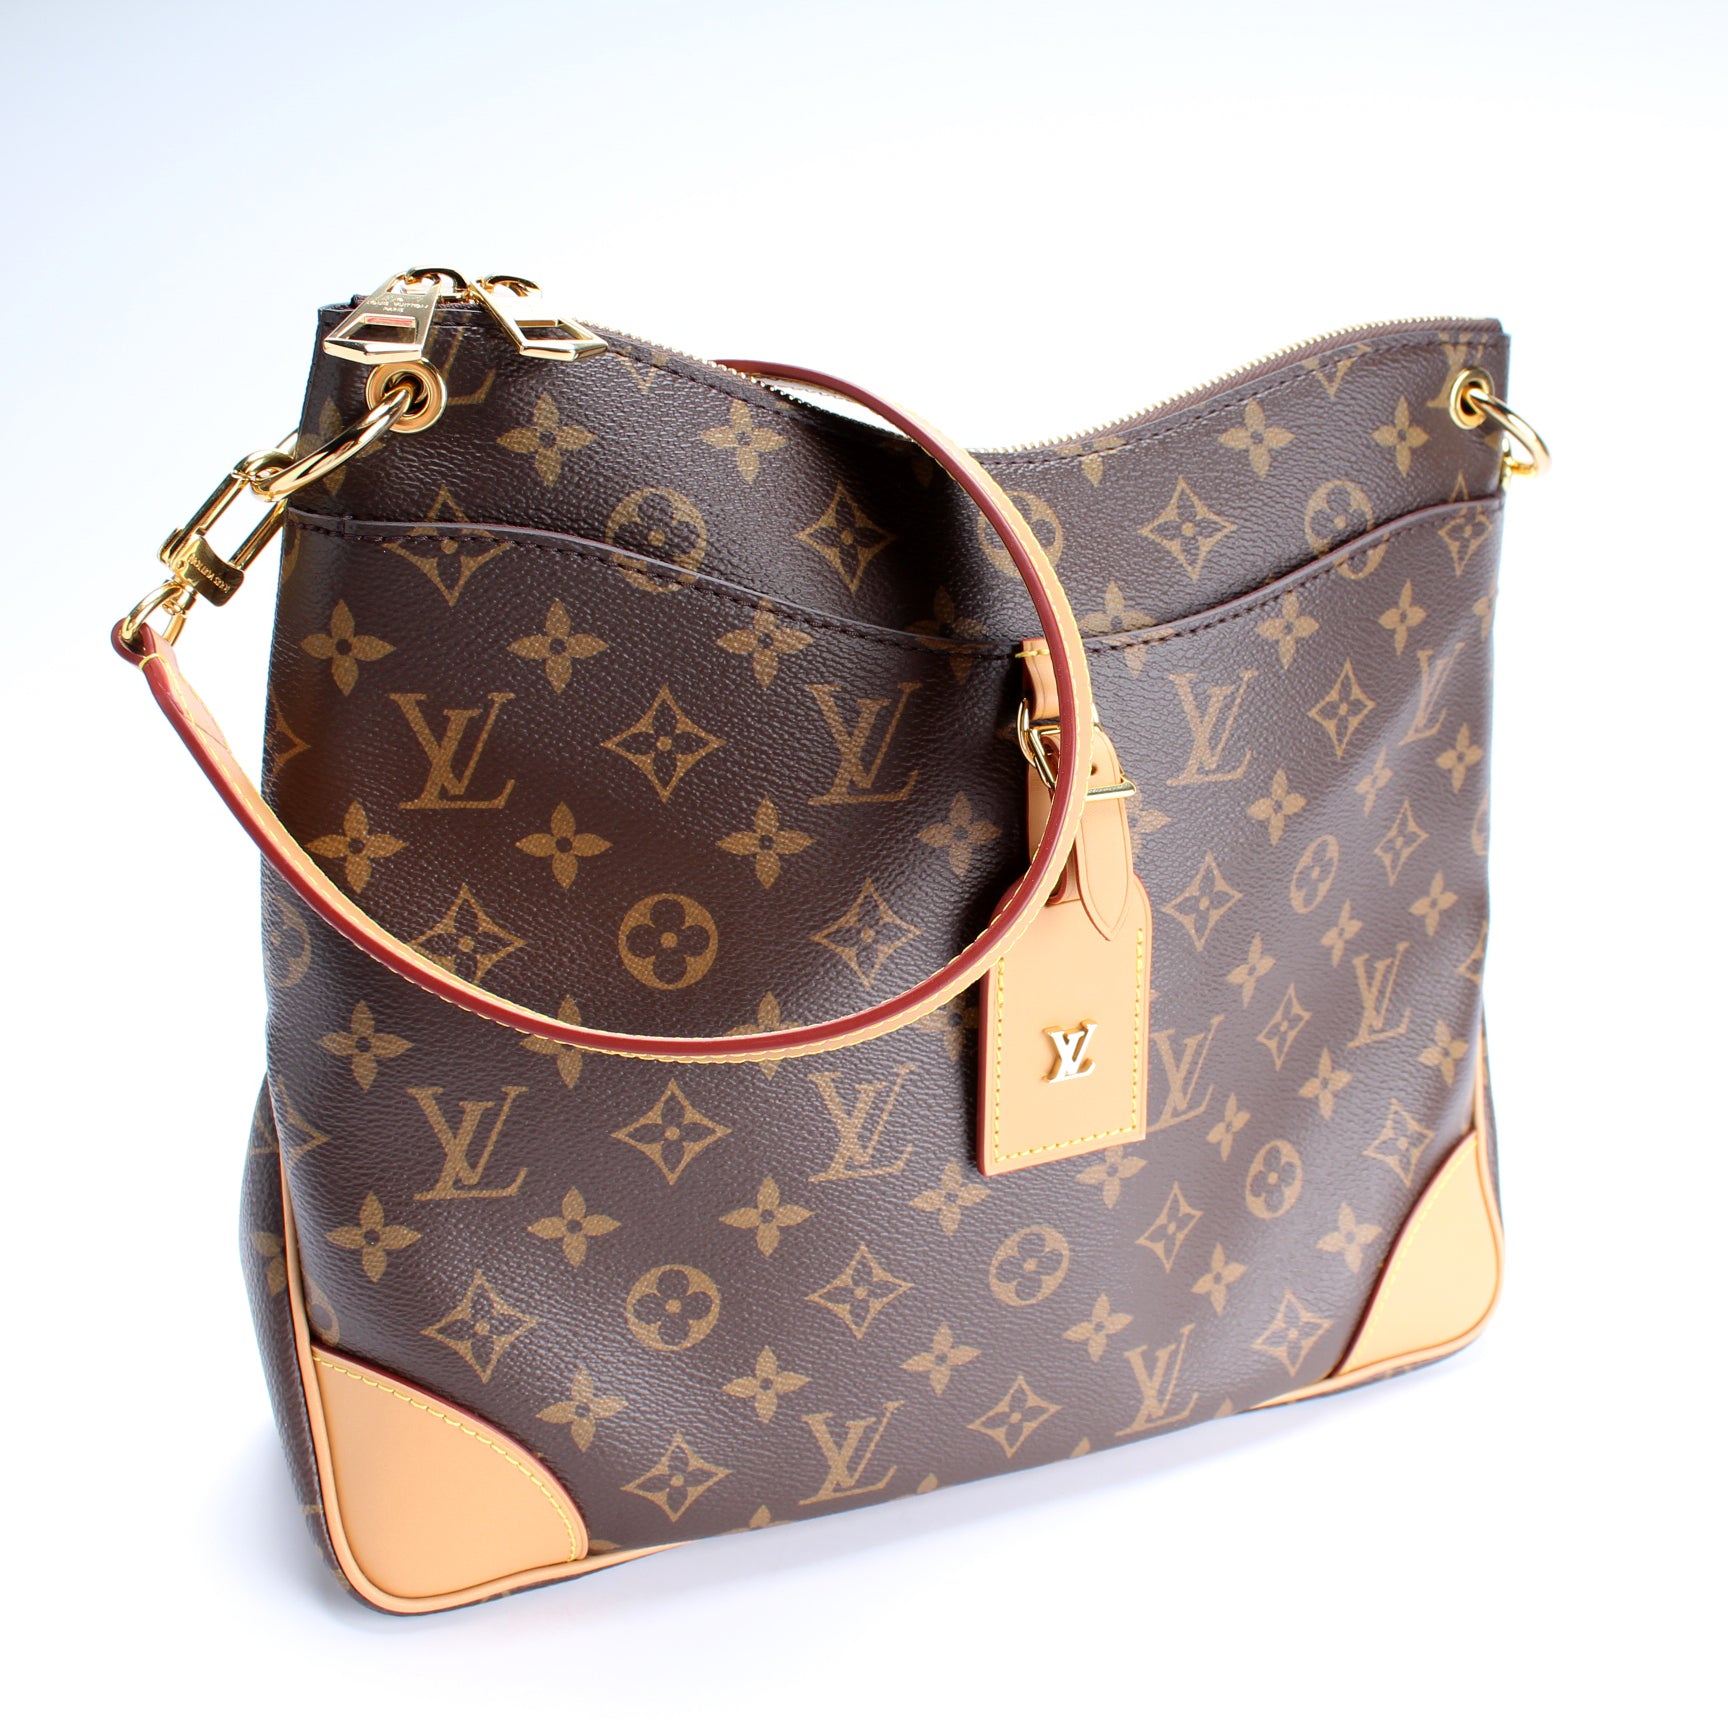 Products By Louis Vuitton: Odeon Mm Bag